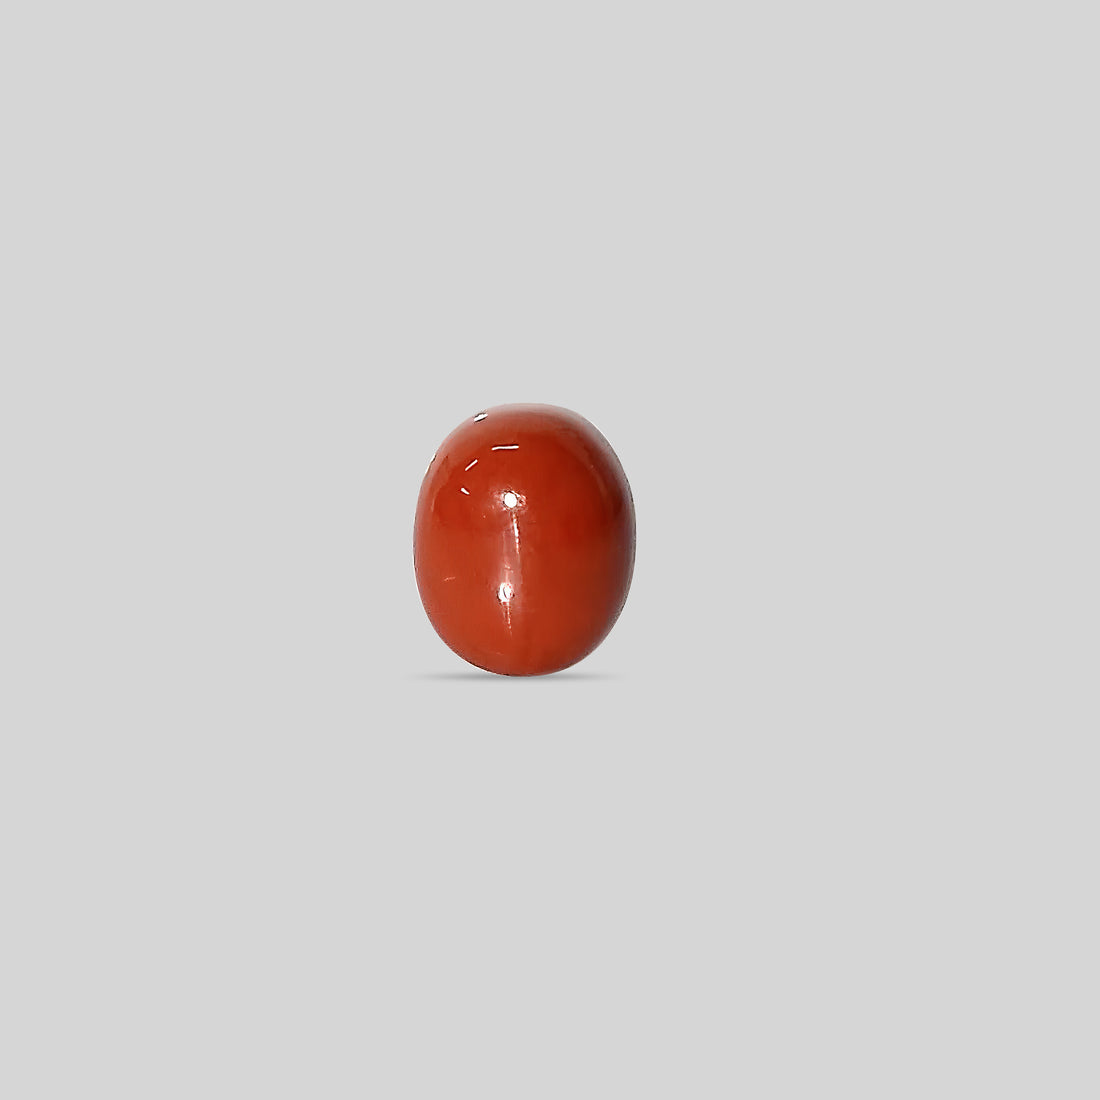 Italian Red Coral - 14.08 Carats